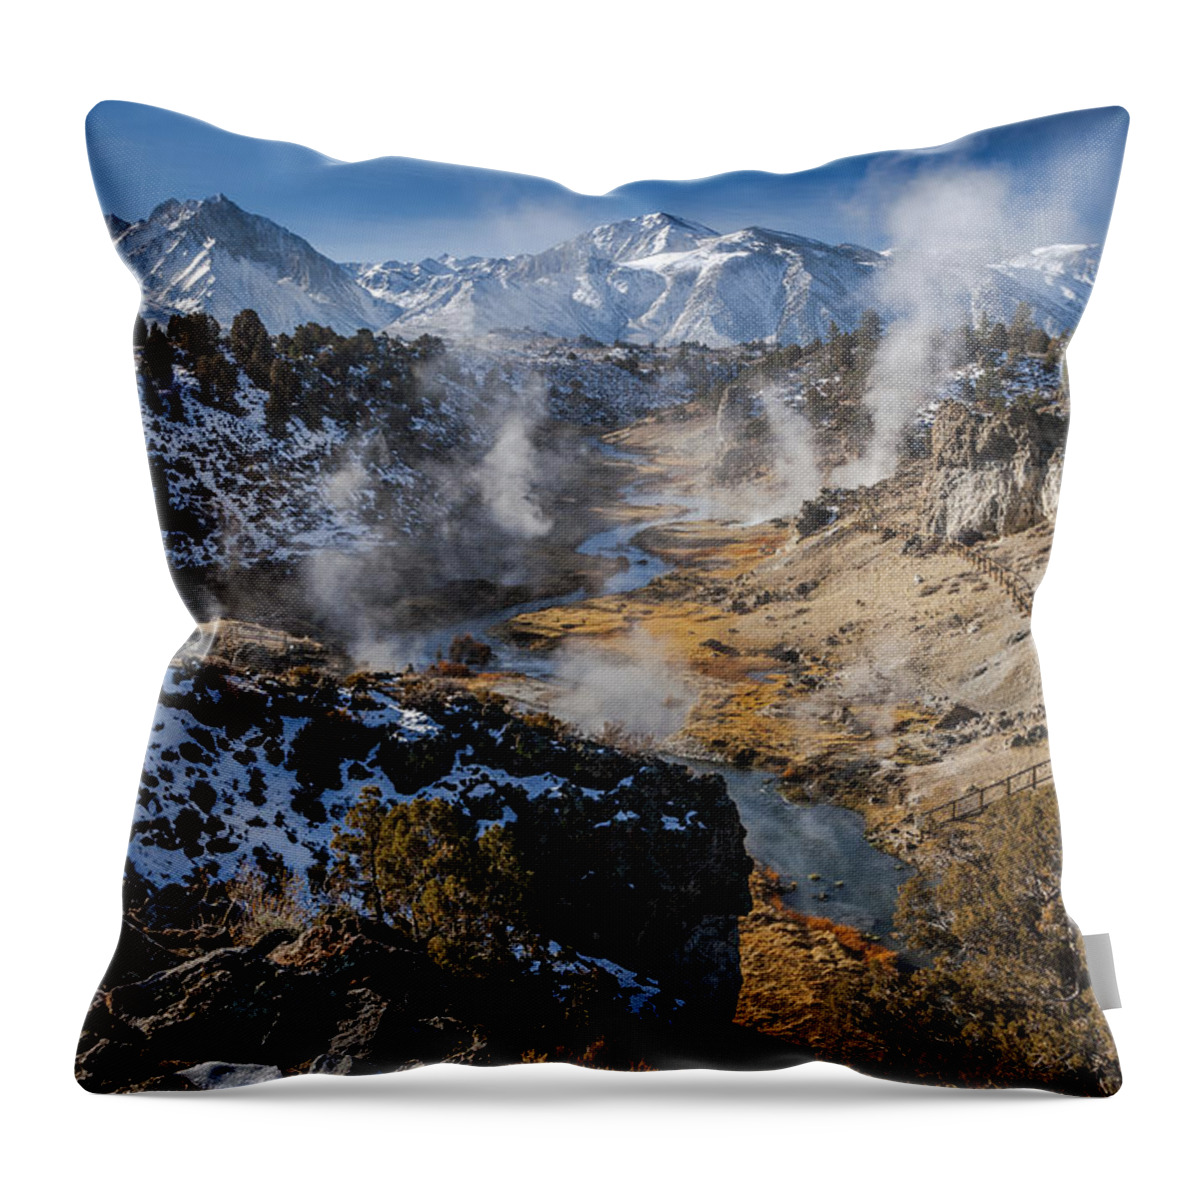 Mountains Throw Pillow featuring the photograph Hot Creek #3 by Cat Connor